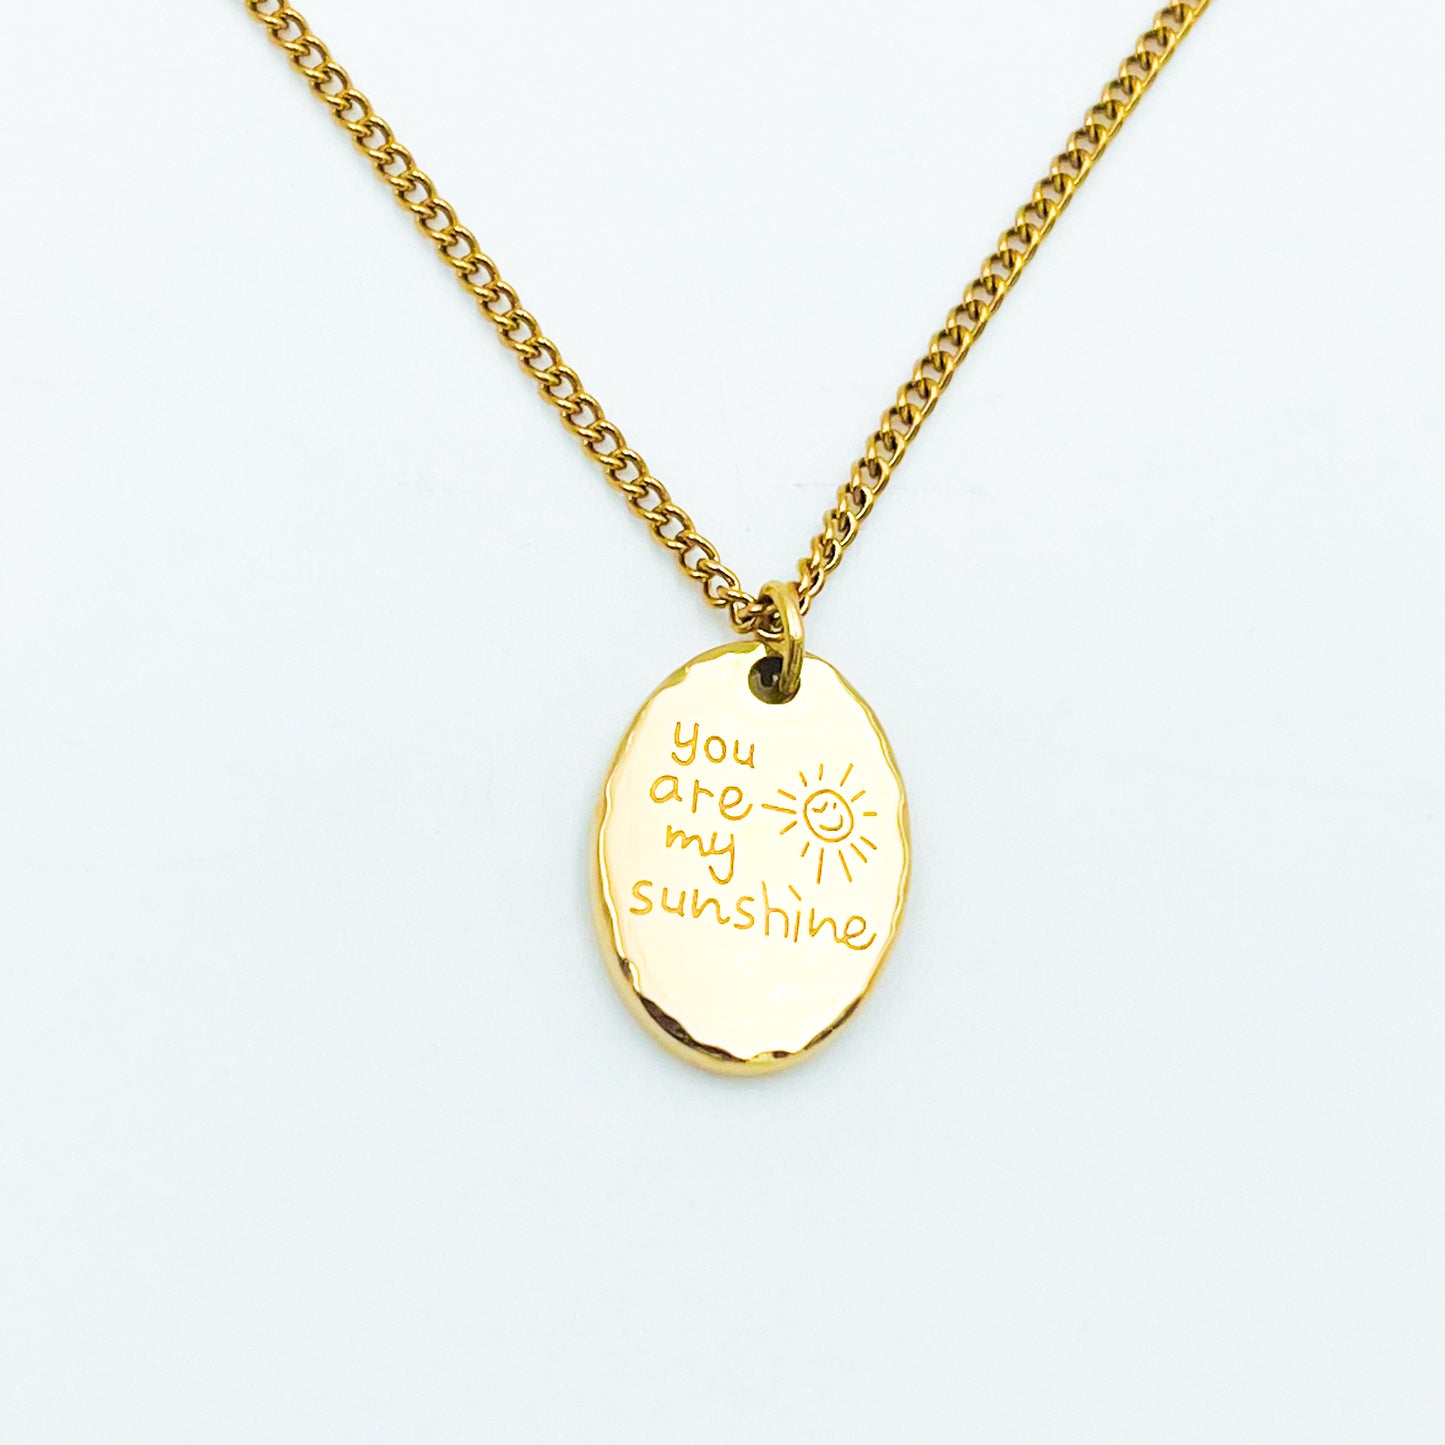 You are my sunshine golden necklace